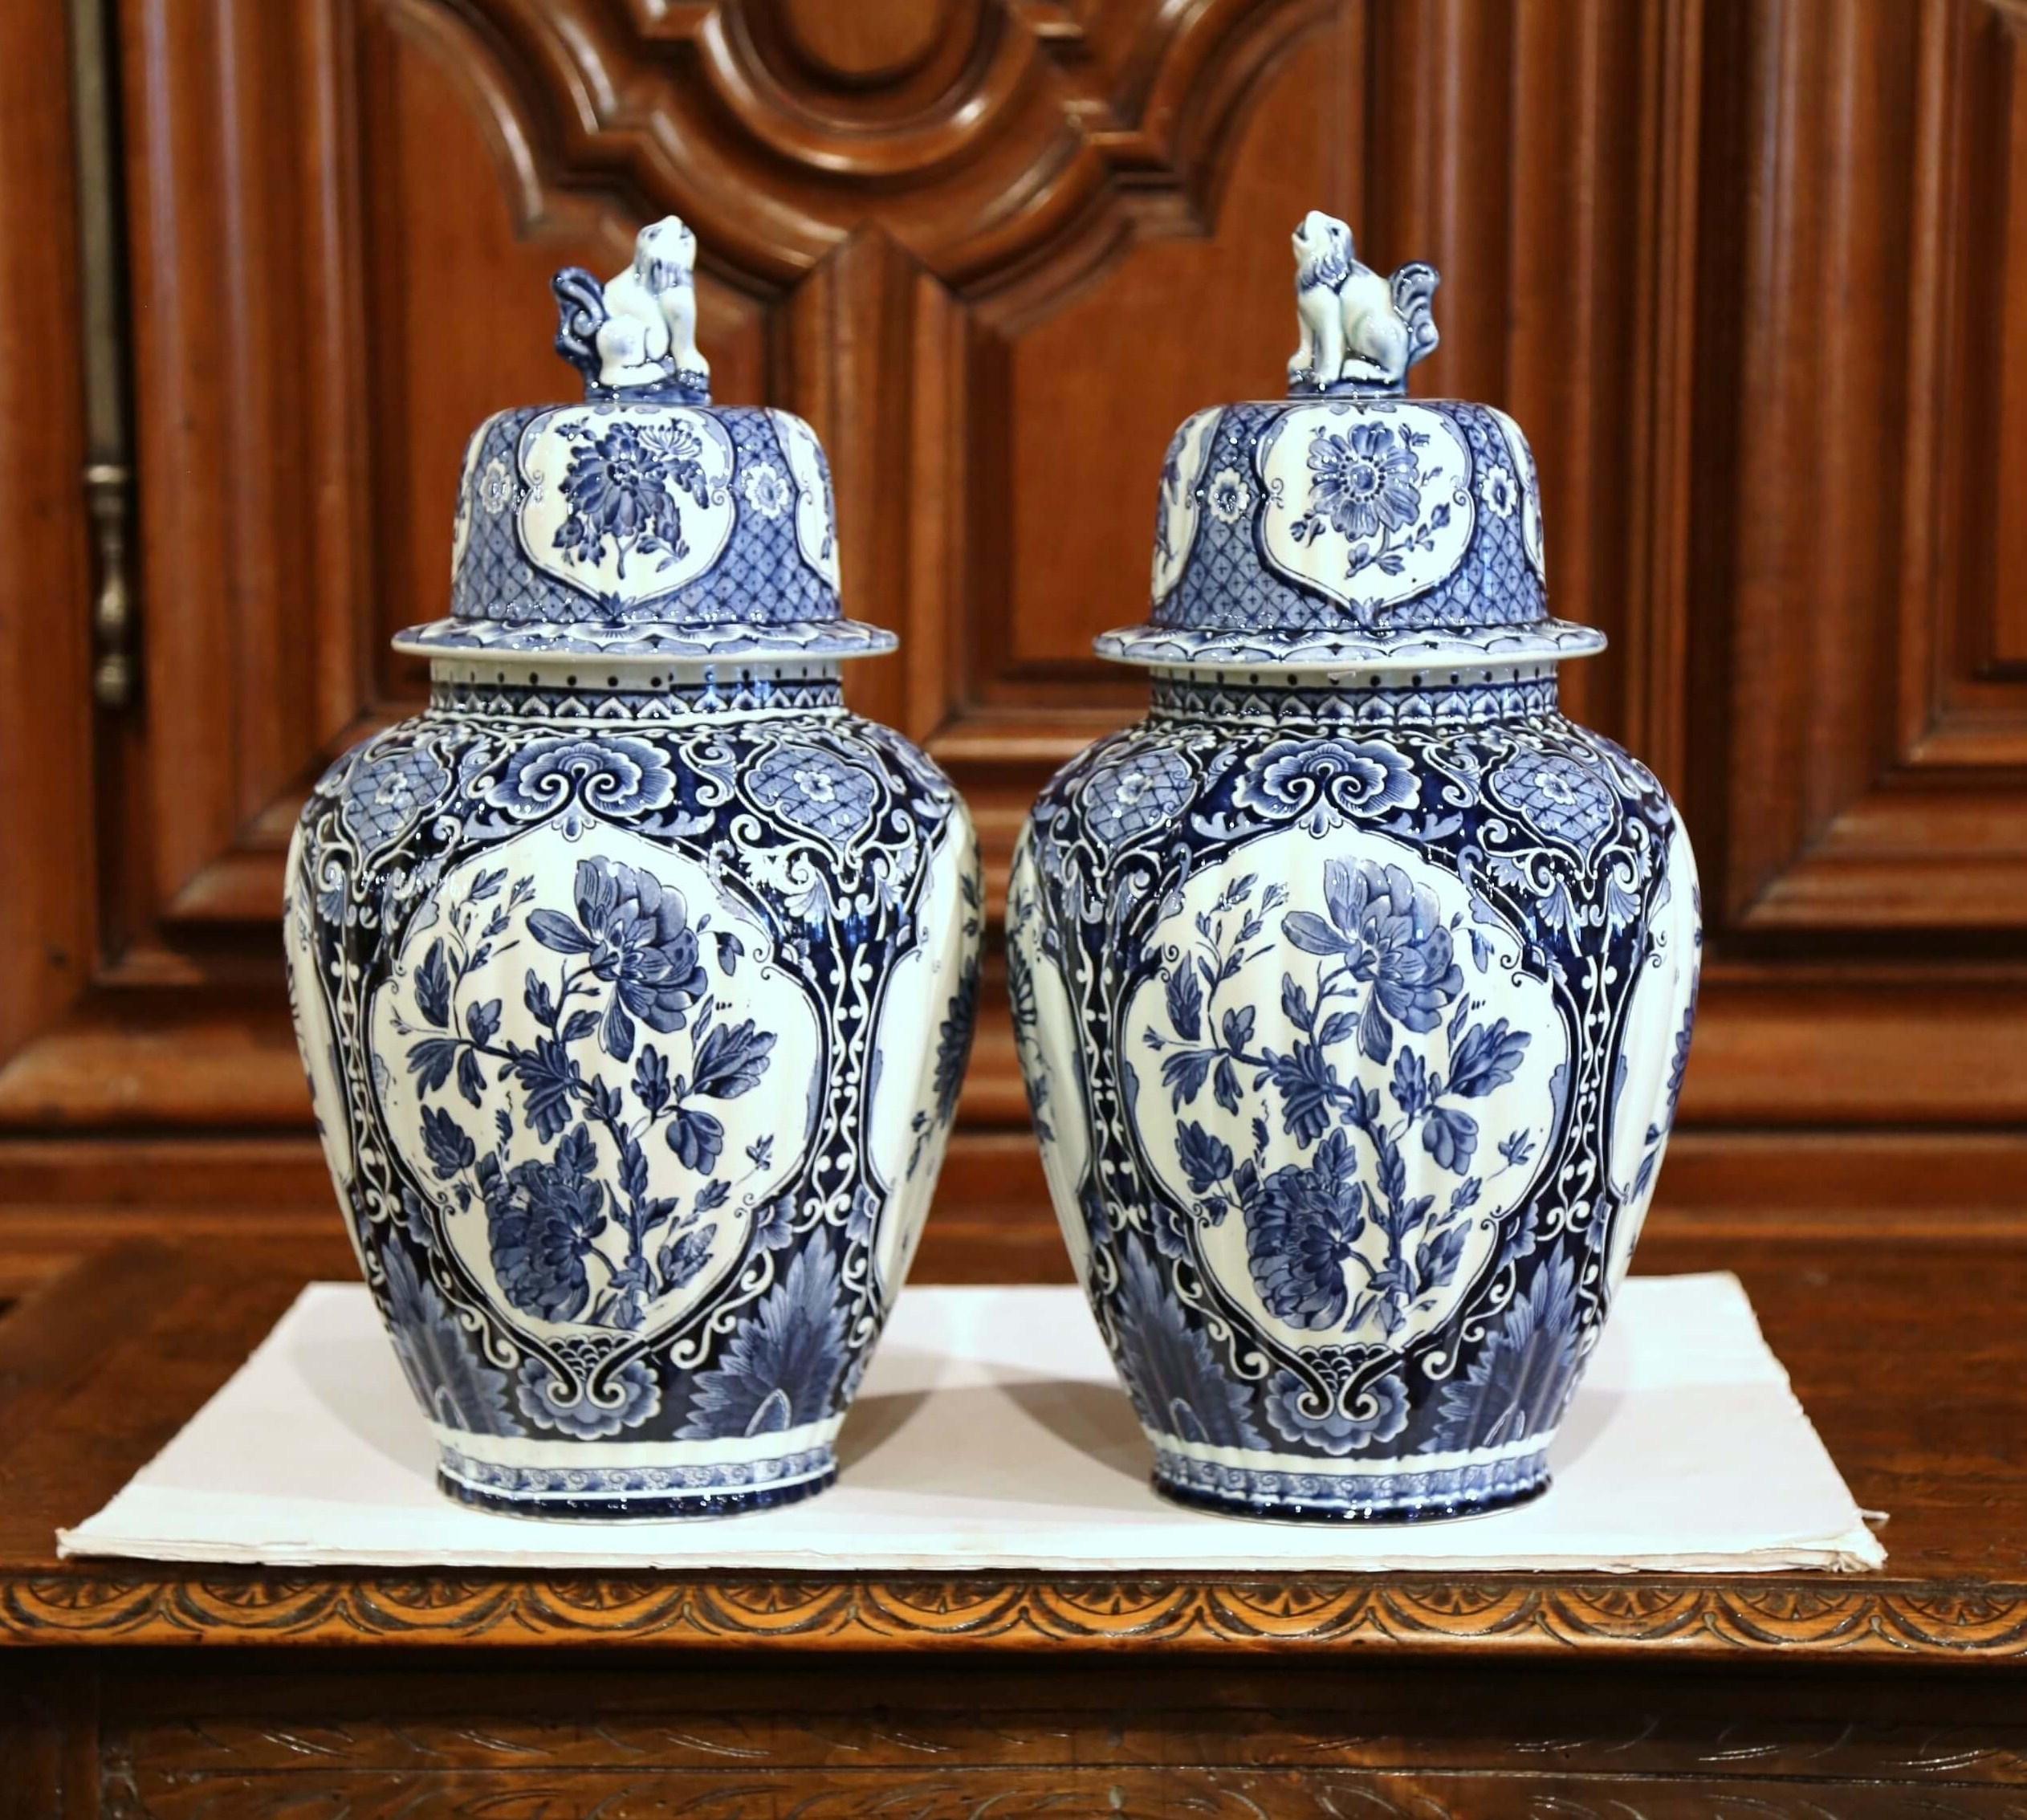 Ceramic Pair of Mid-20th Century Dutch Blue and White Royal Maastricht Delft Ginger Jars